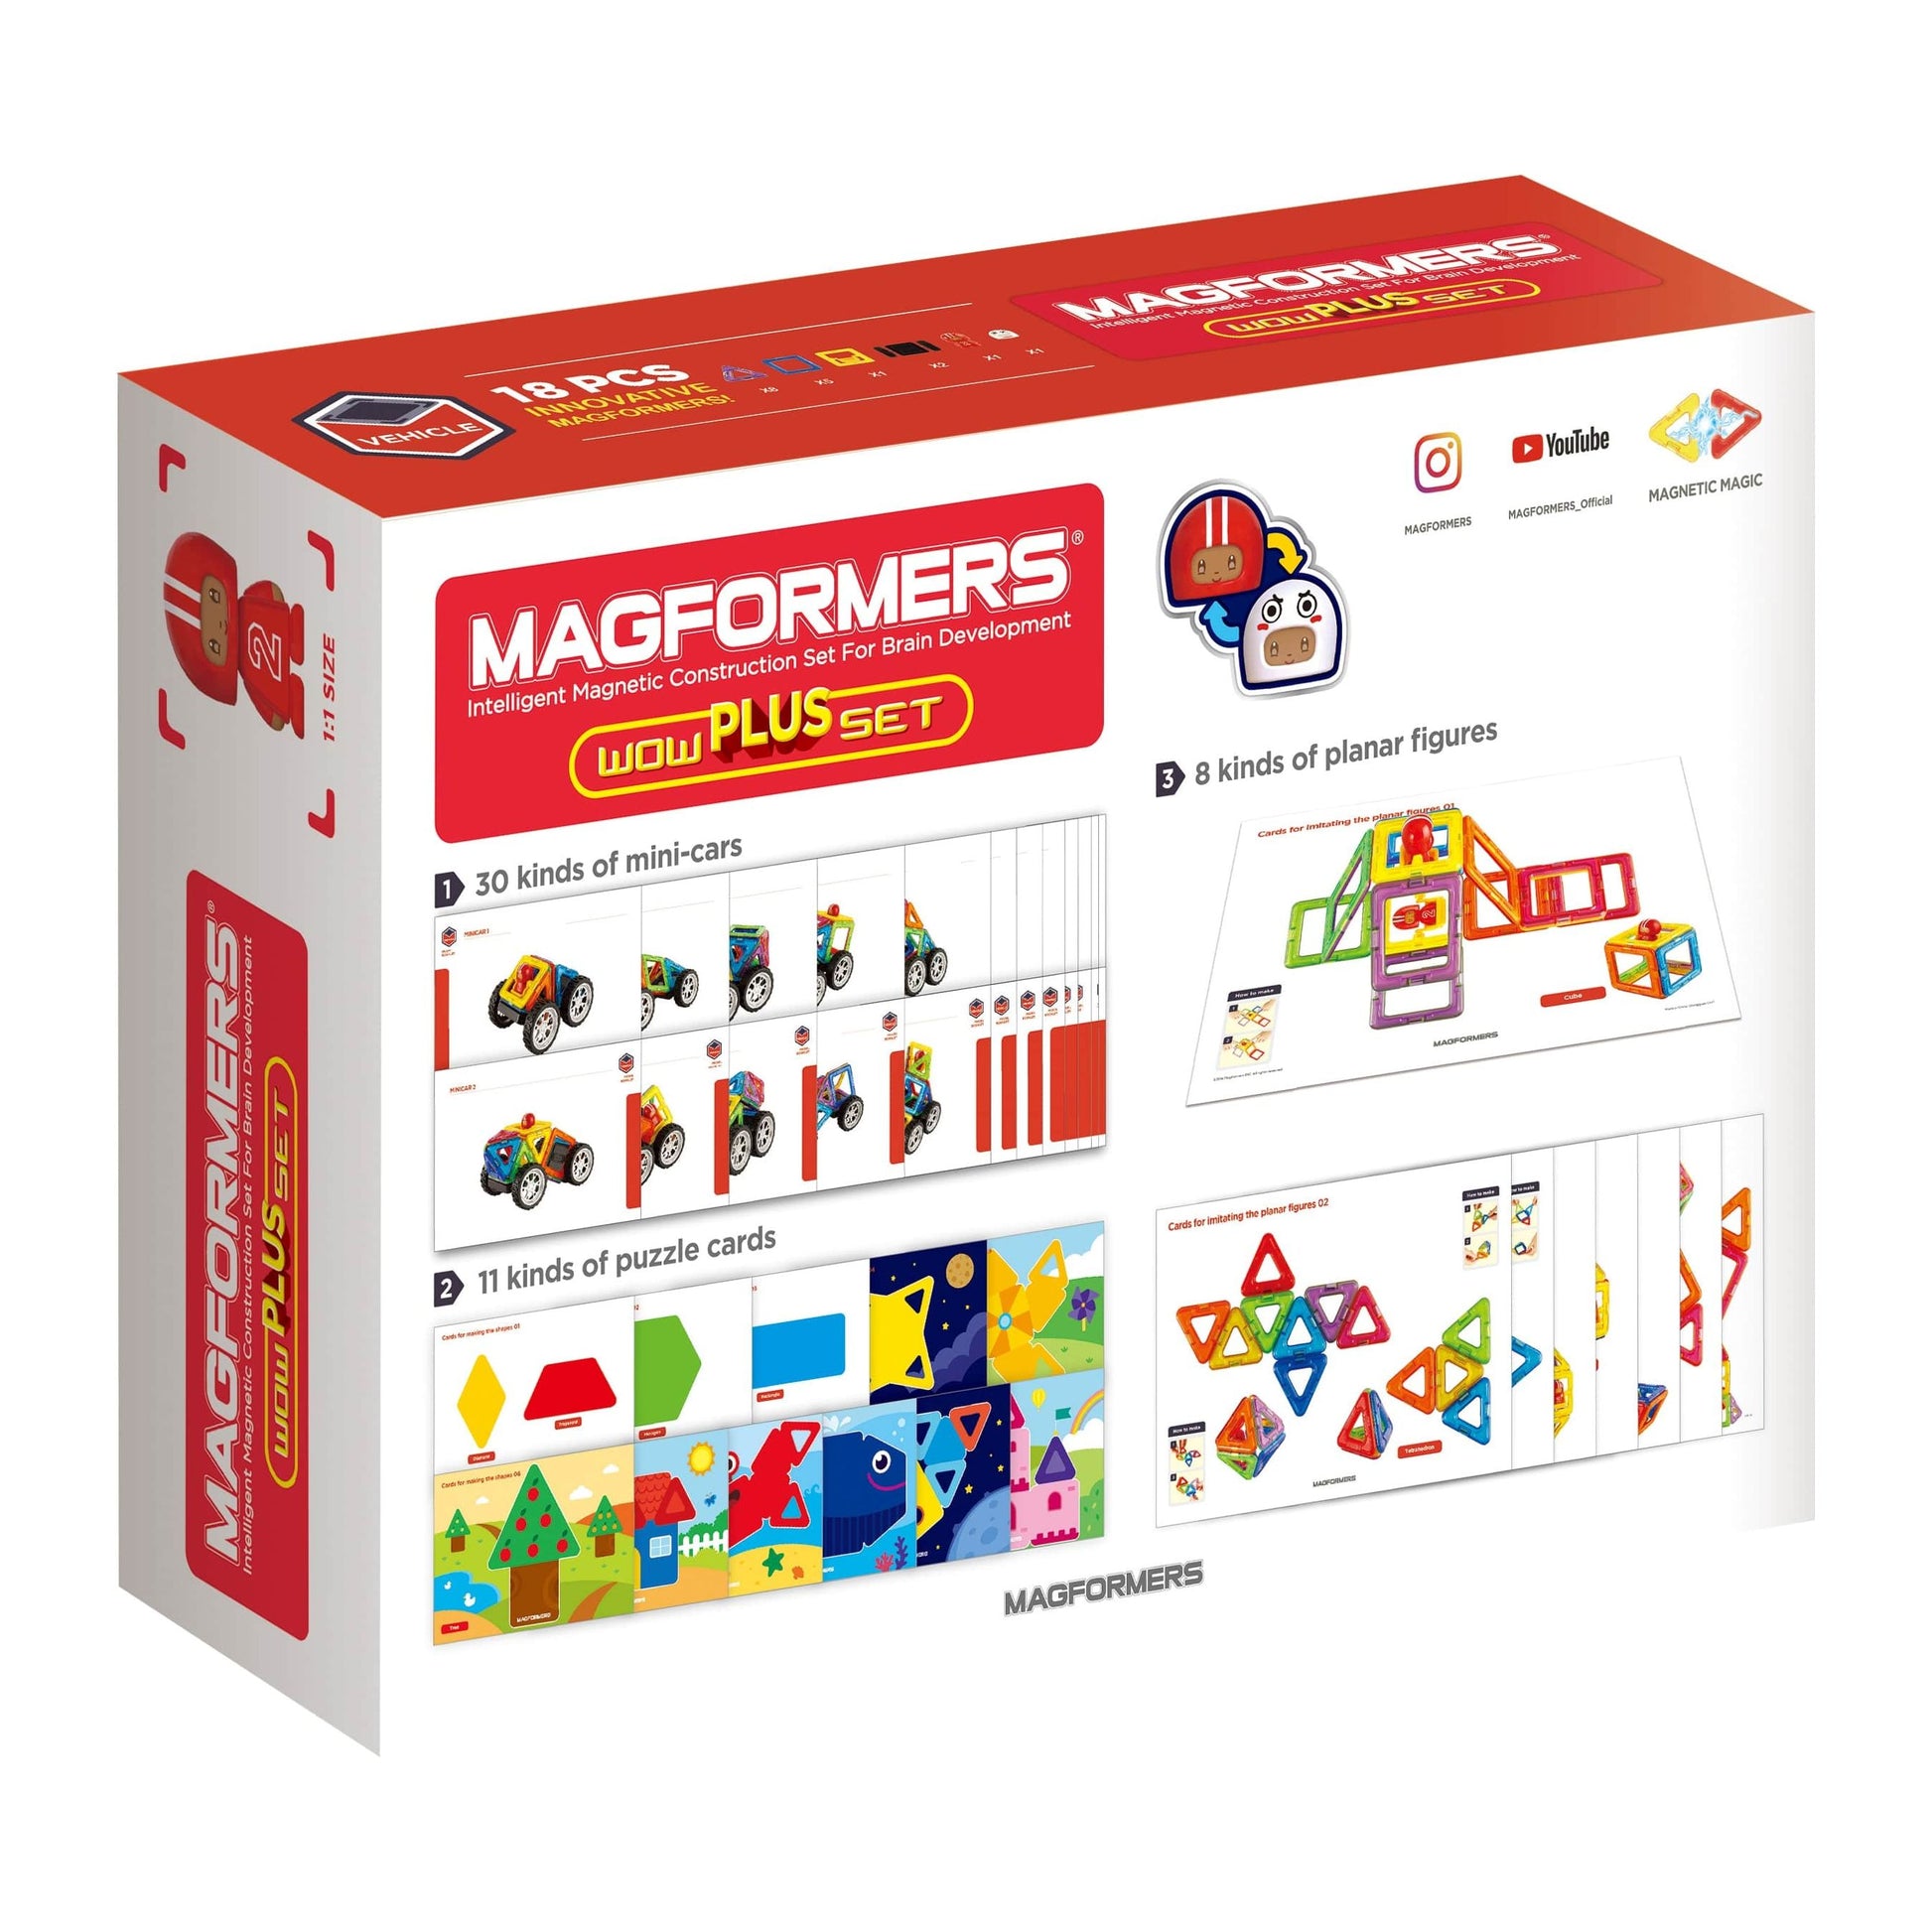 Magformers Construction Toy WOW Plus Cars & Puzzles Set  back of box